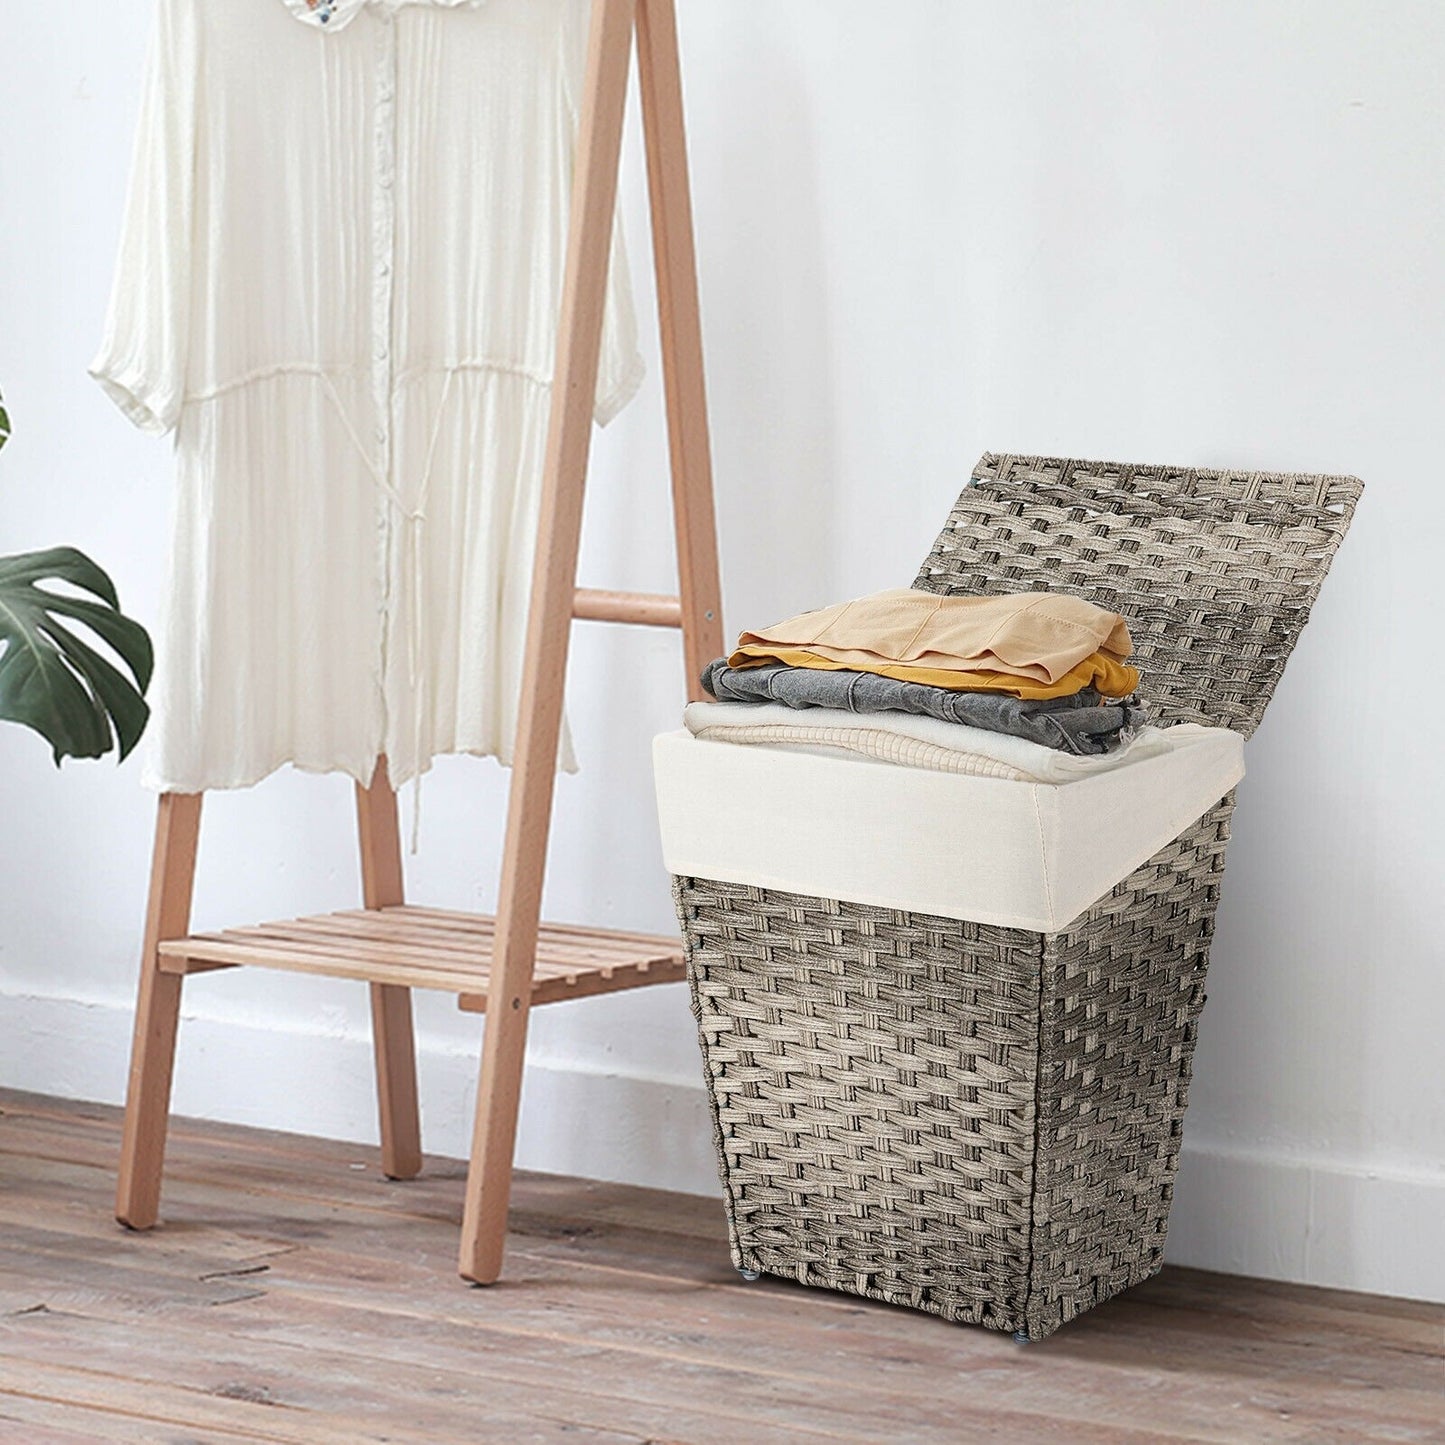 Foldable Handwoven Laundry Hamper with Removable Liner, Gray